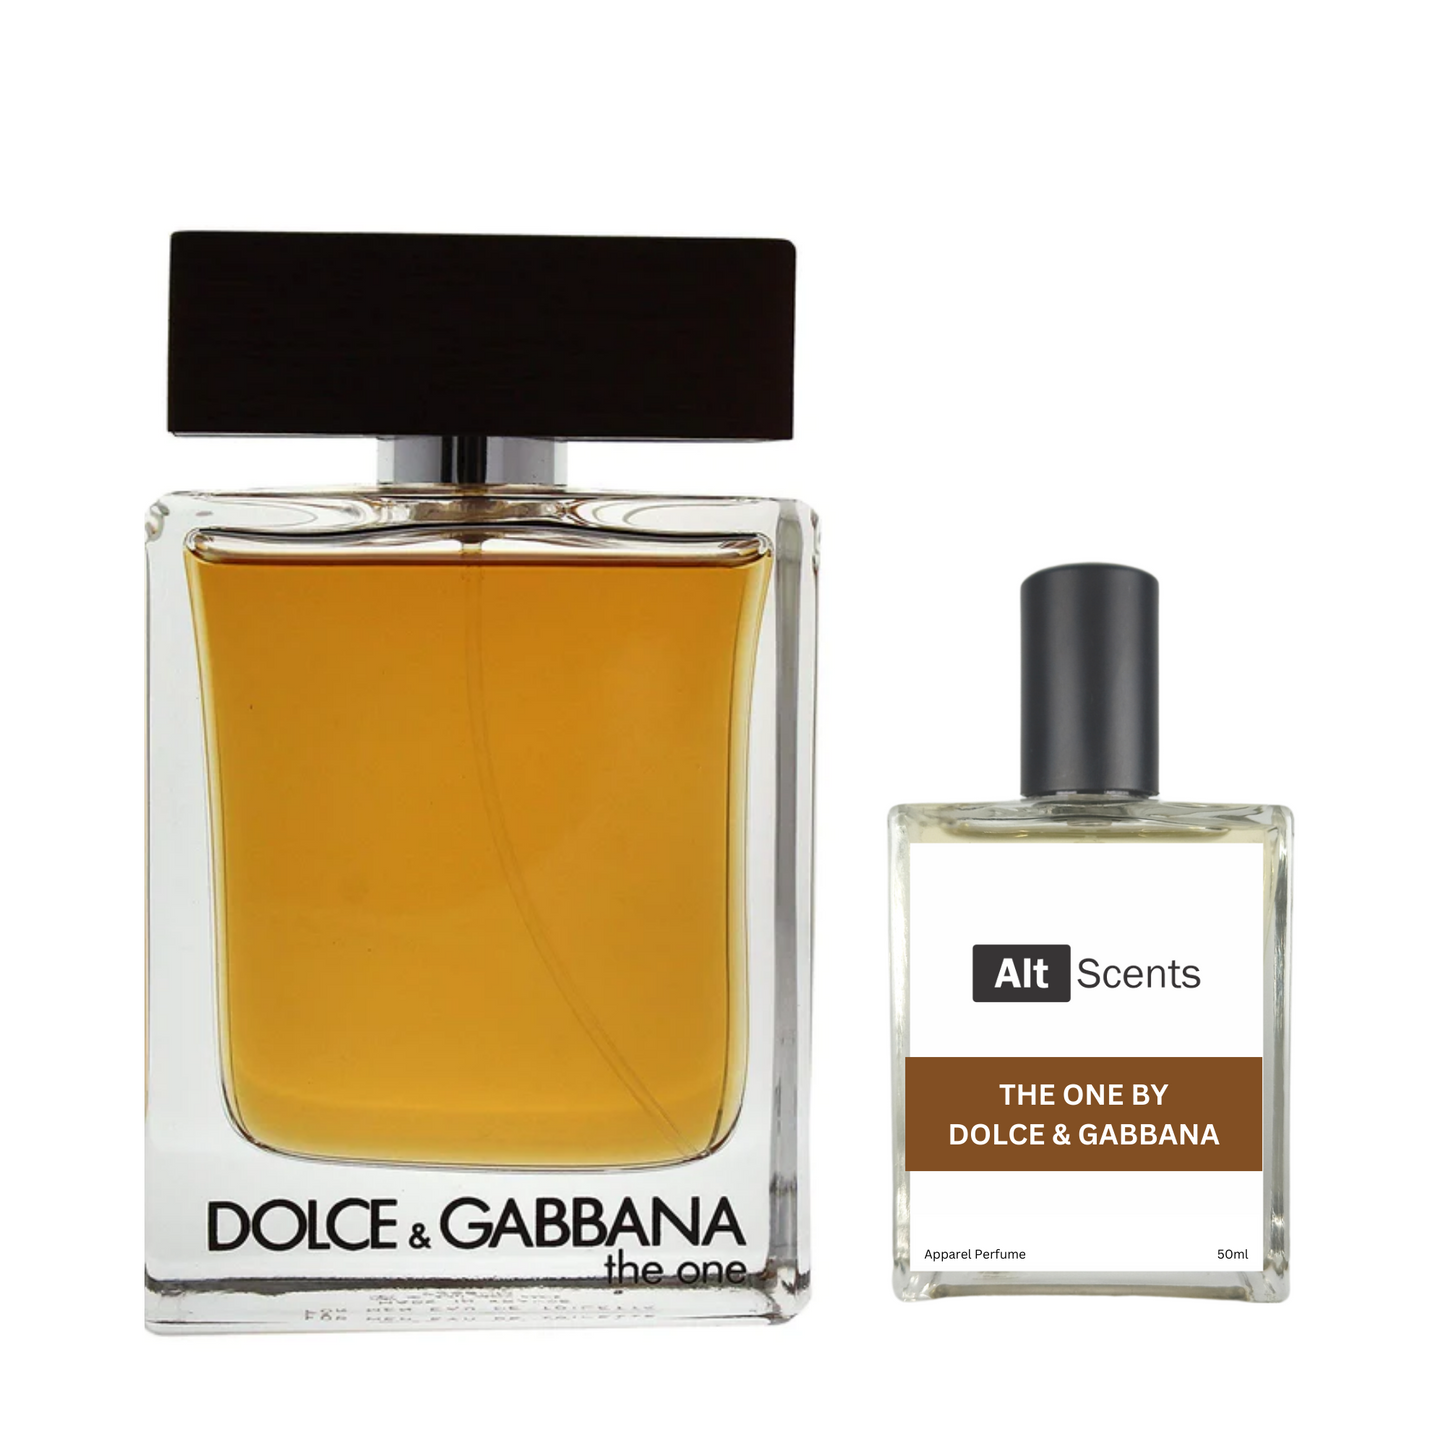 The One by Dolce & Gabbana type Perfume